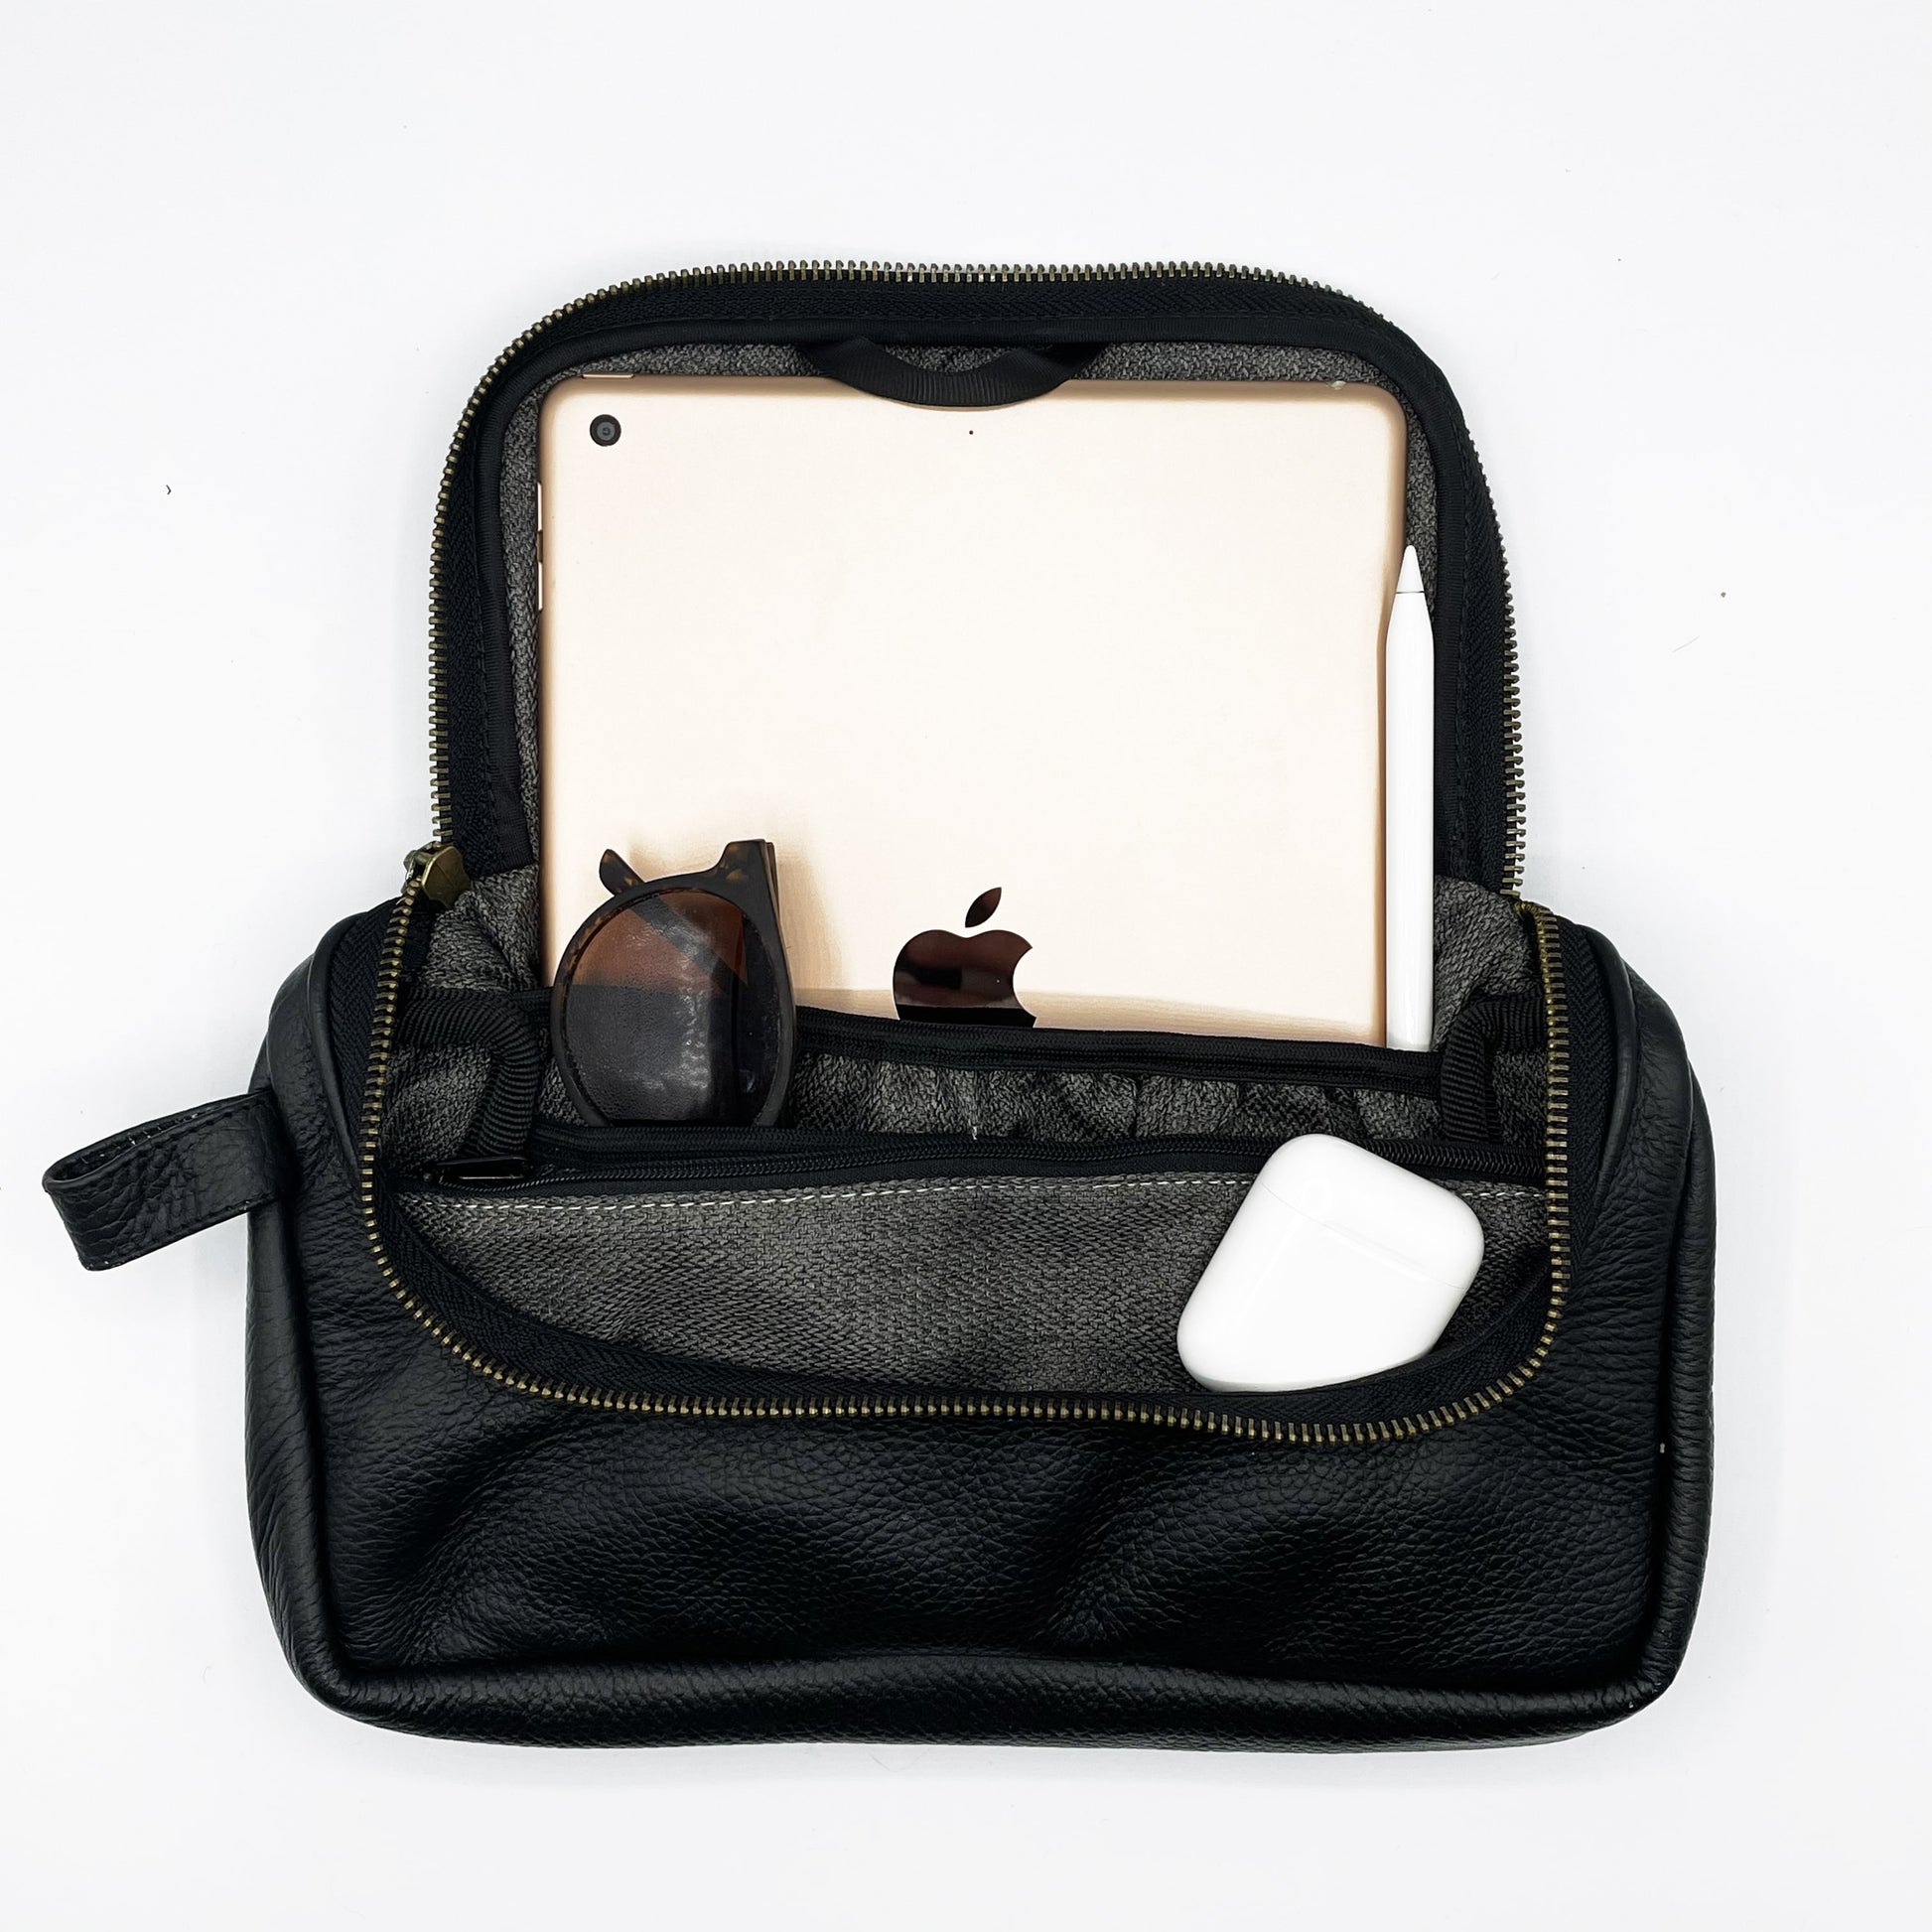 NEW Black Leather Travel Media Pouch - Great Useful Stuff